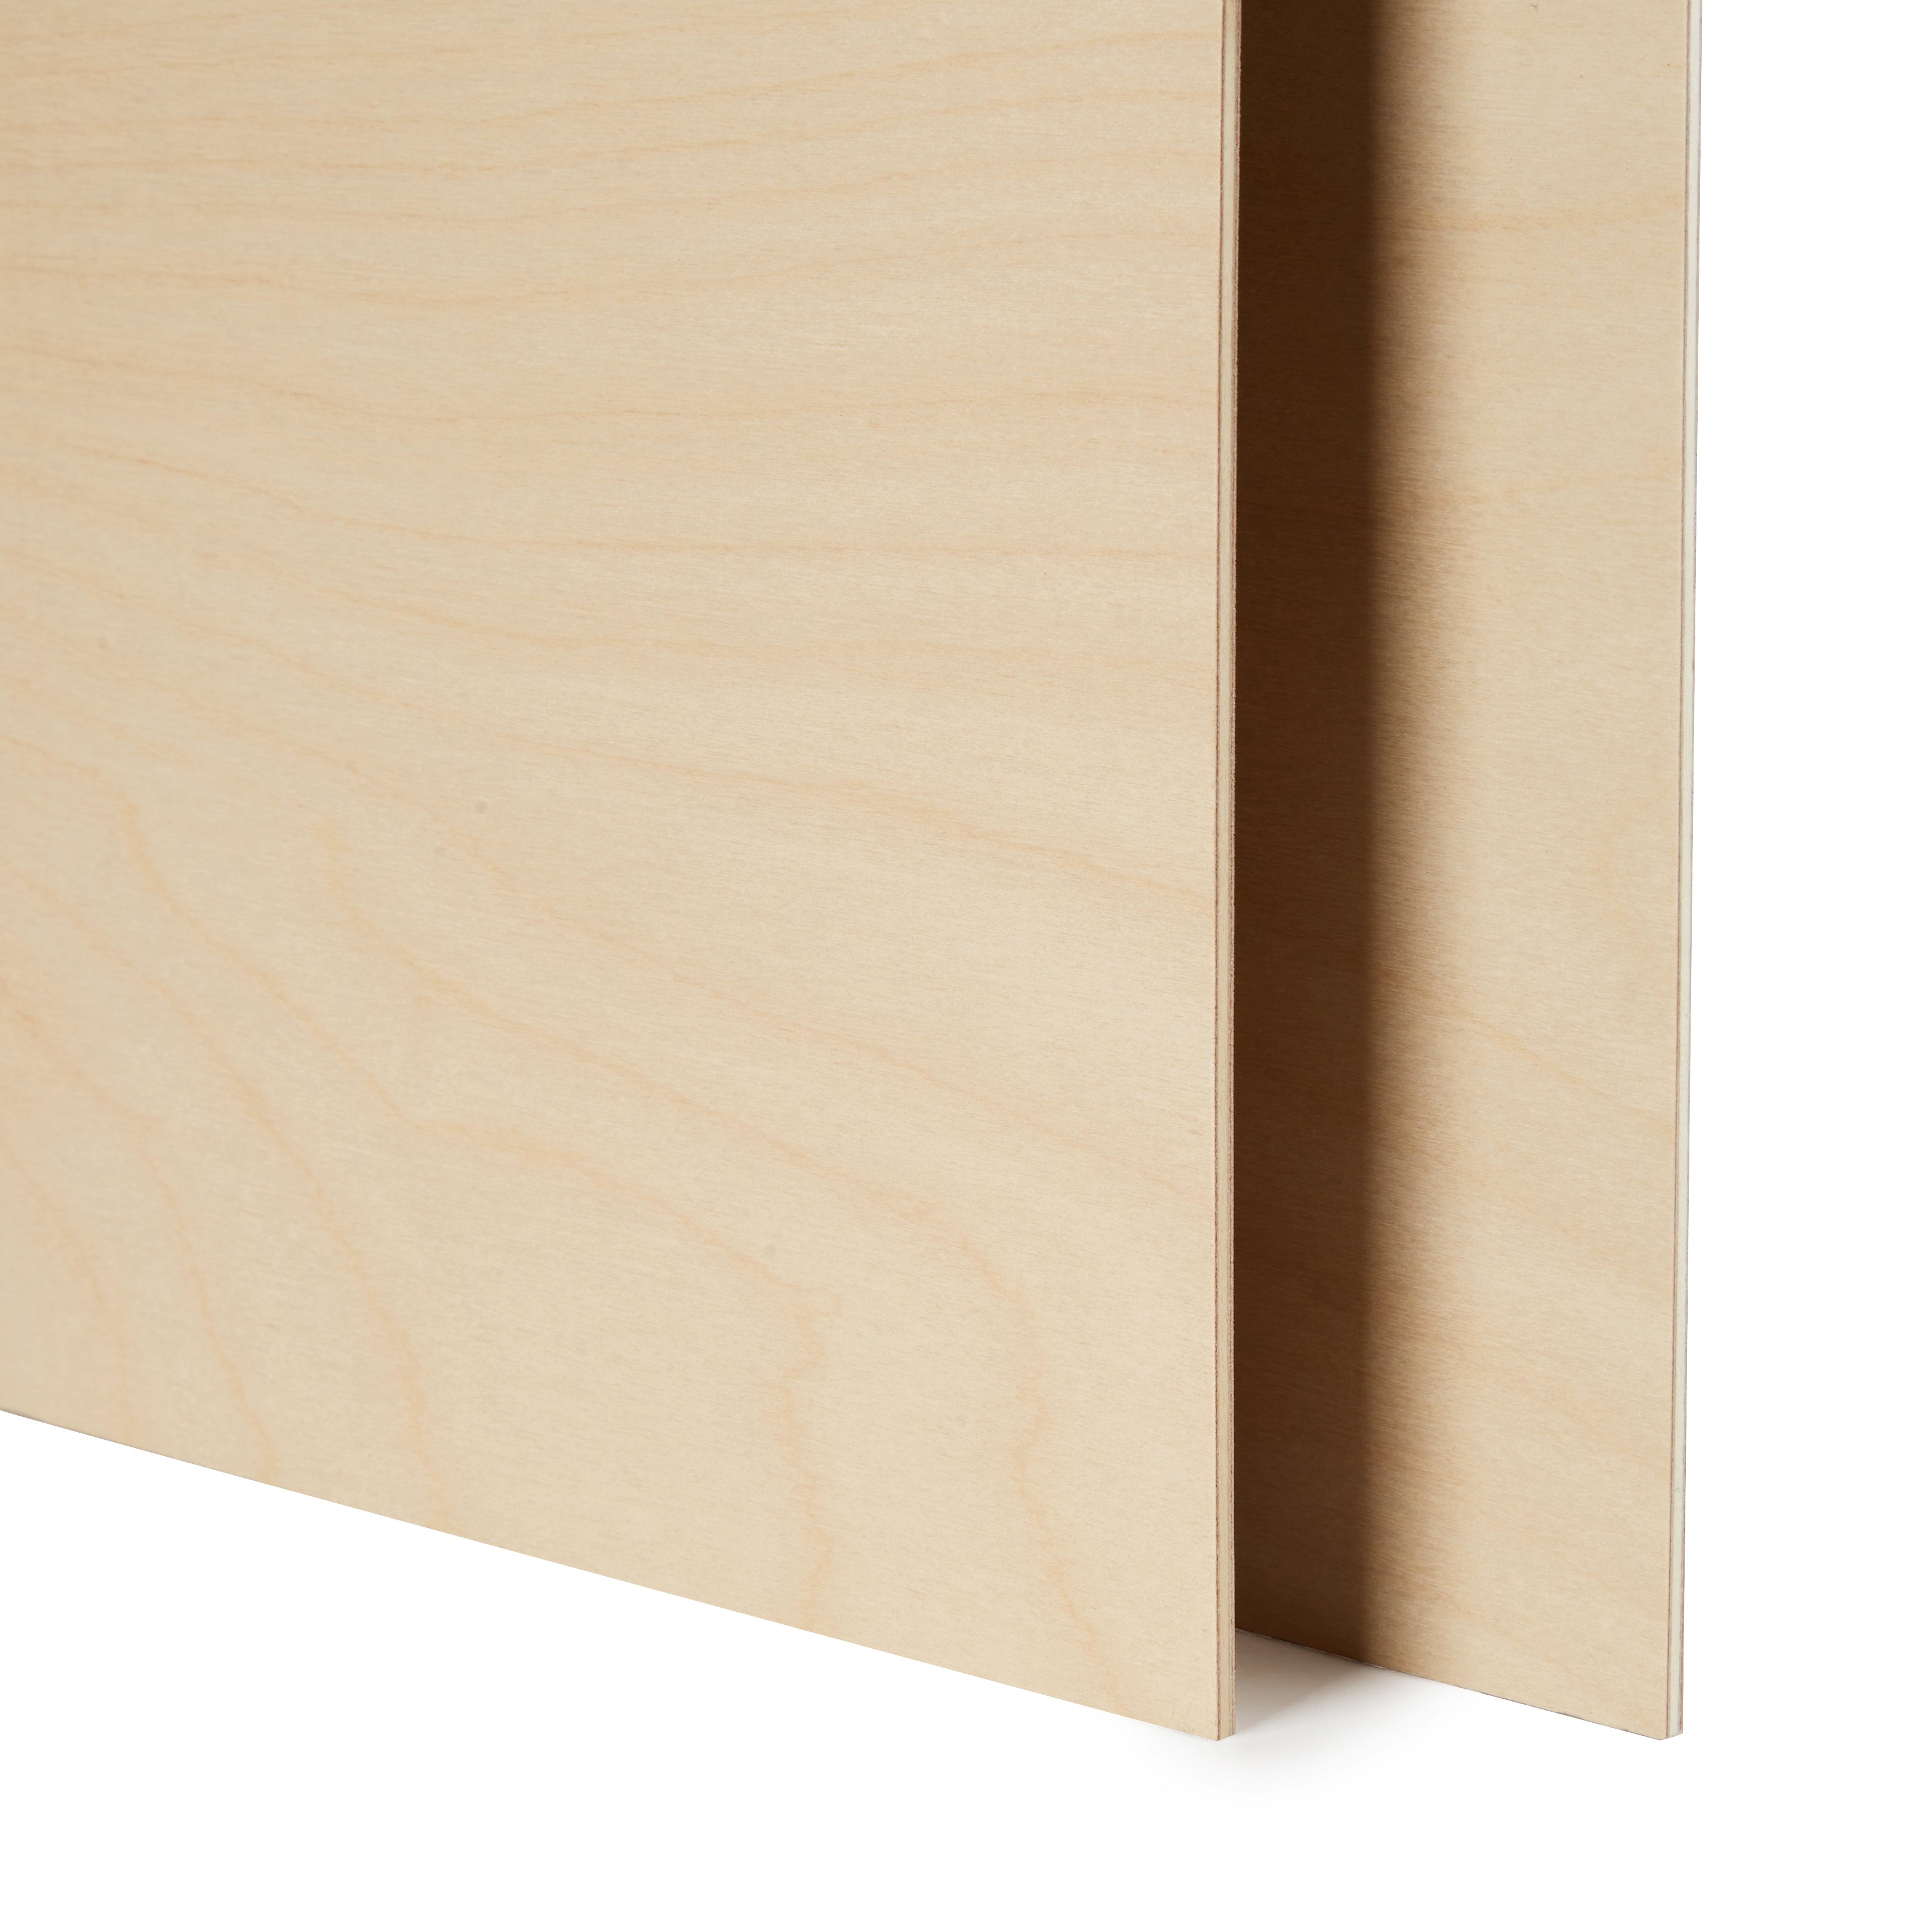 Birch Plywood Sheets